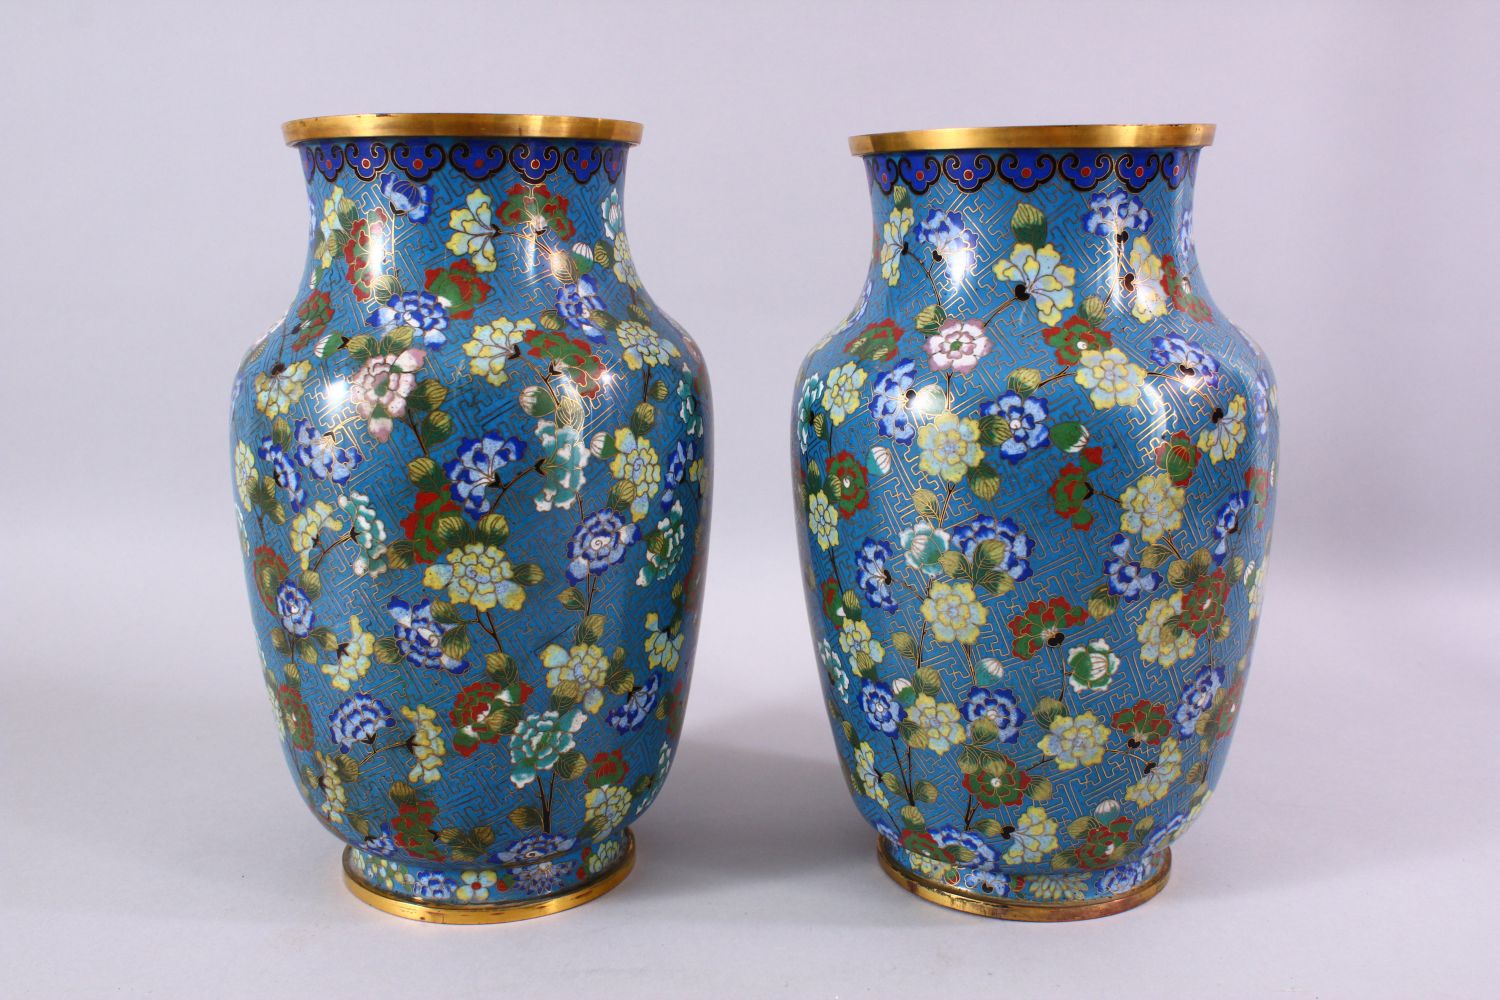 A LARGE PAIR OF 19TH / 20TH CENTURY CHINESE CLOISONNE VASES, each decorate with an array of flora - Image 3 of 6